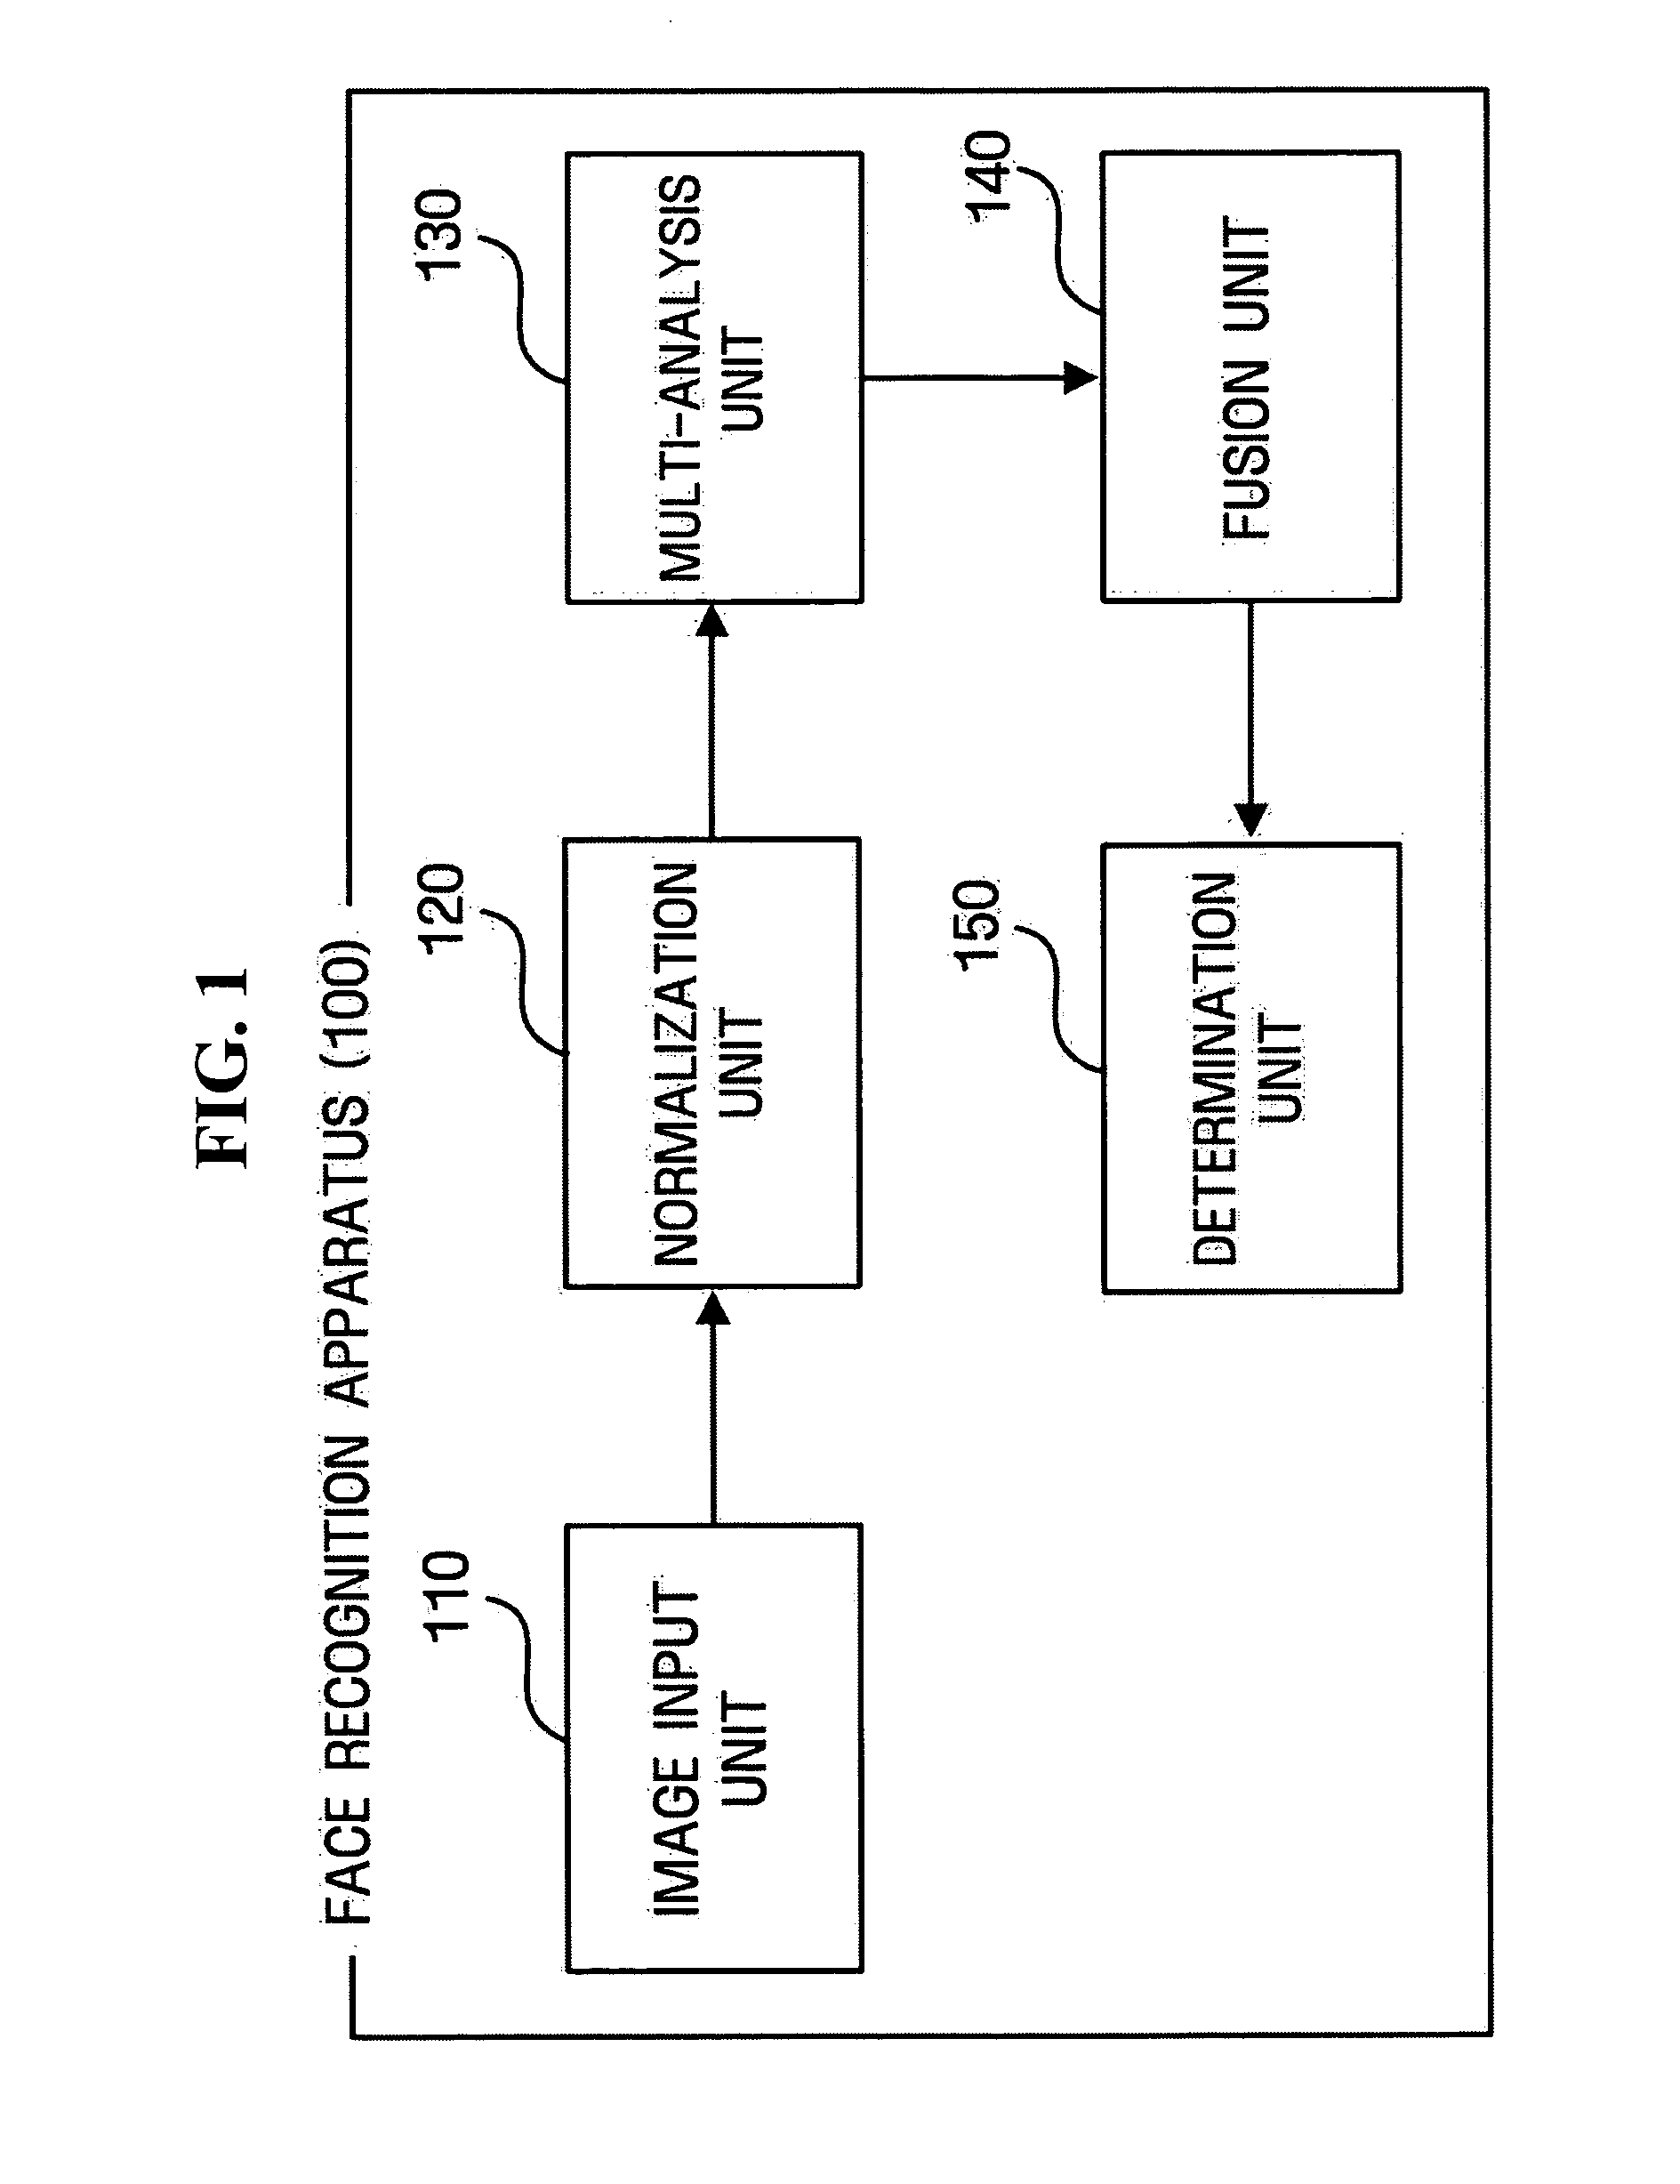 Scalable face recognition method and apparatus based on complementary features of face image